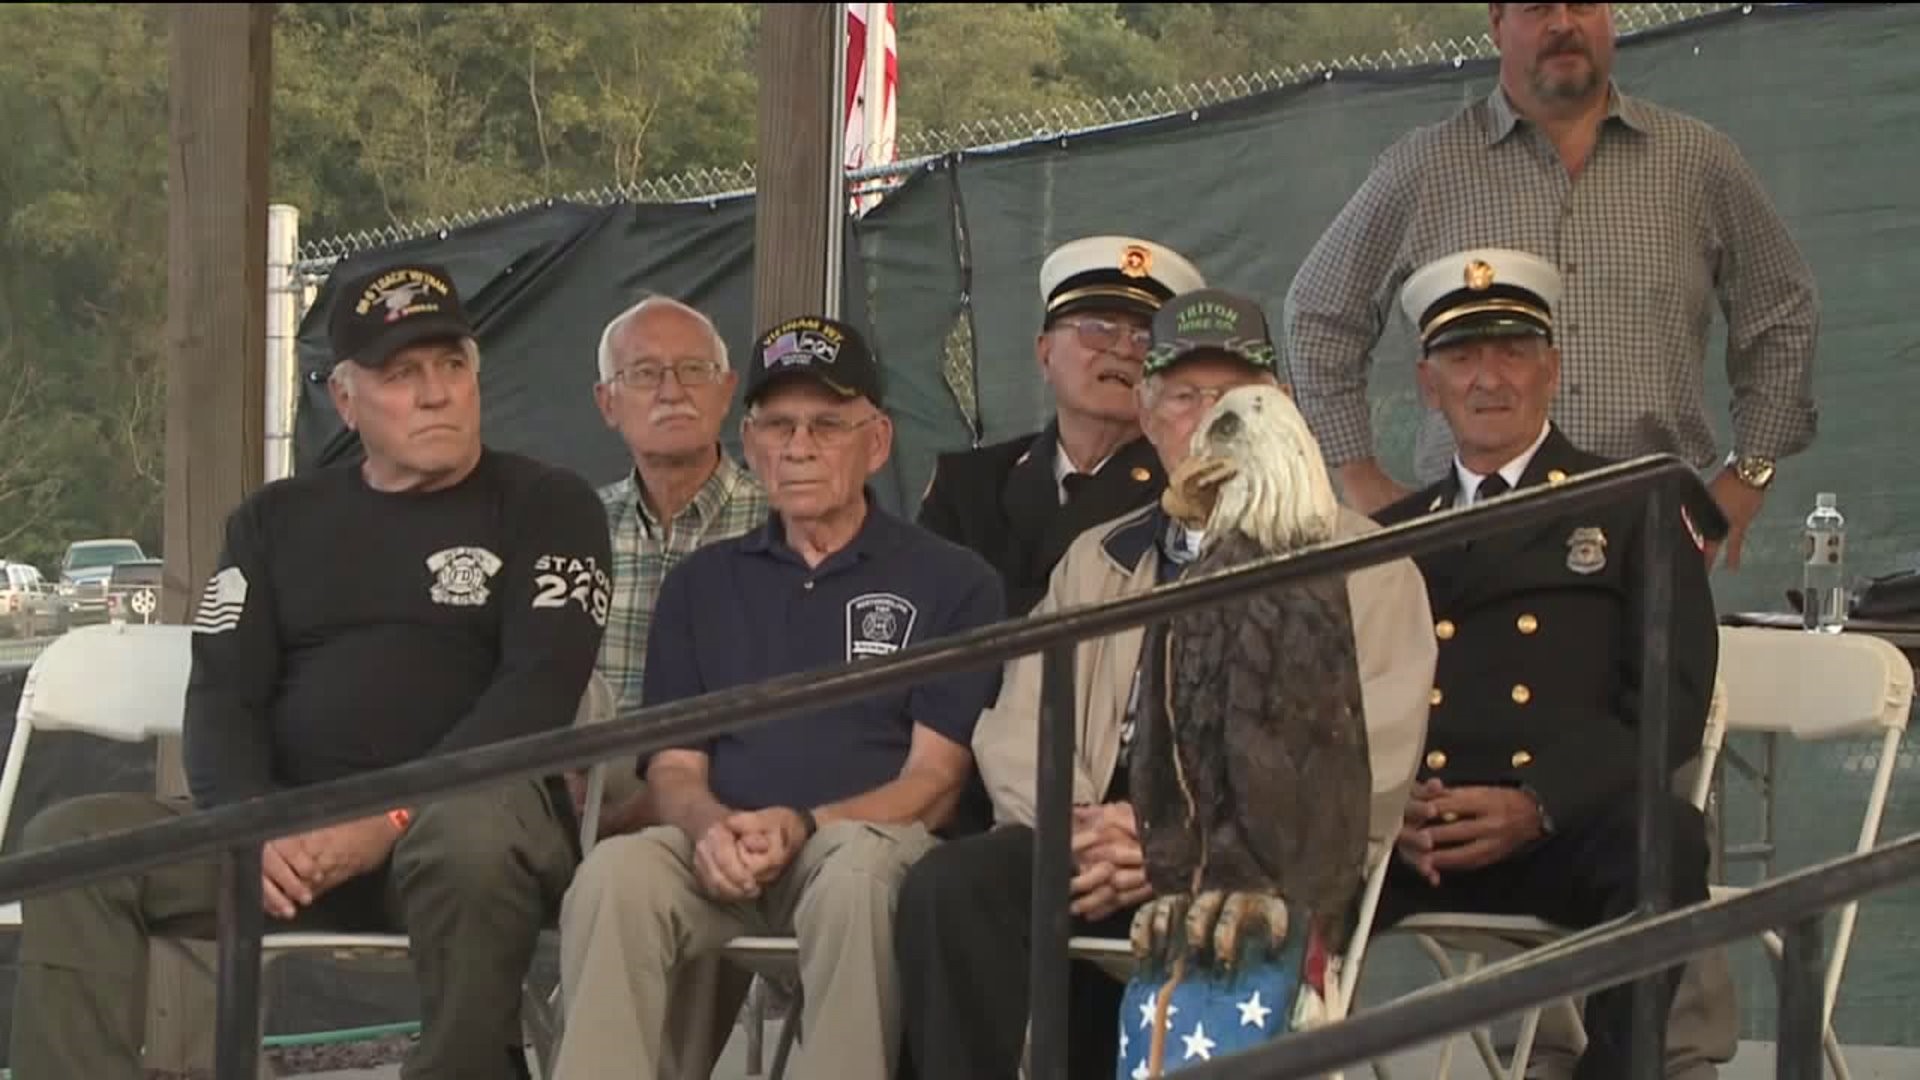 First Responders Honored at Wyoming County Fair